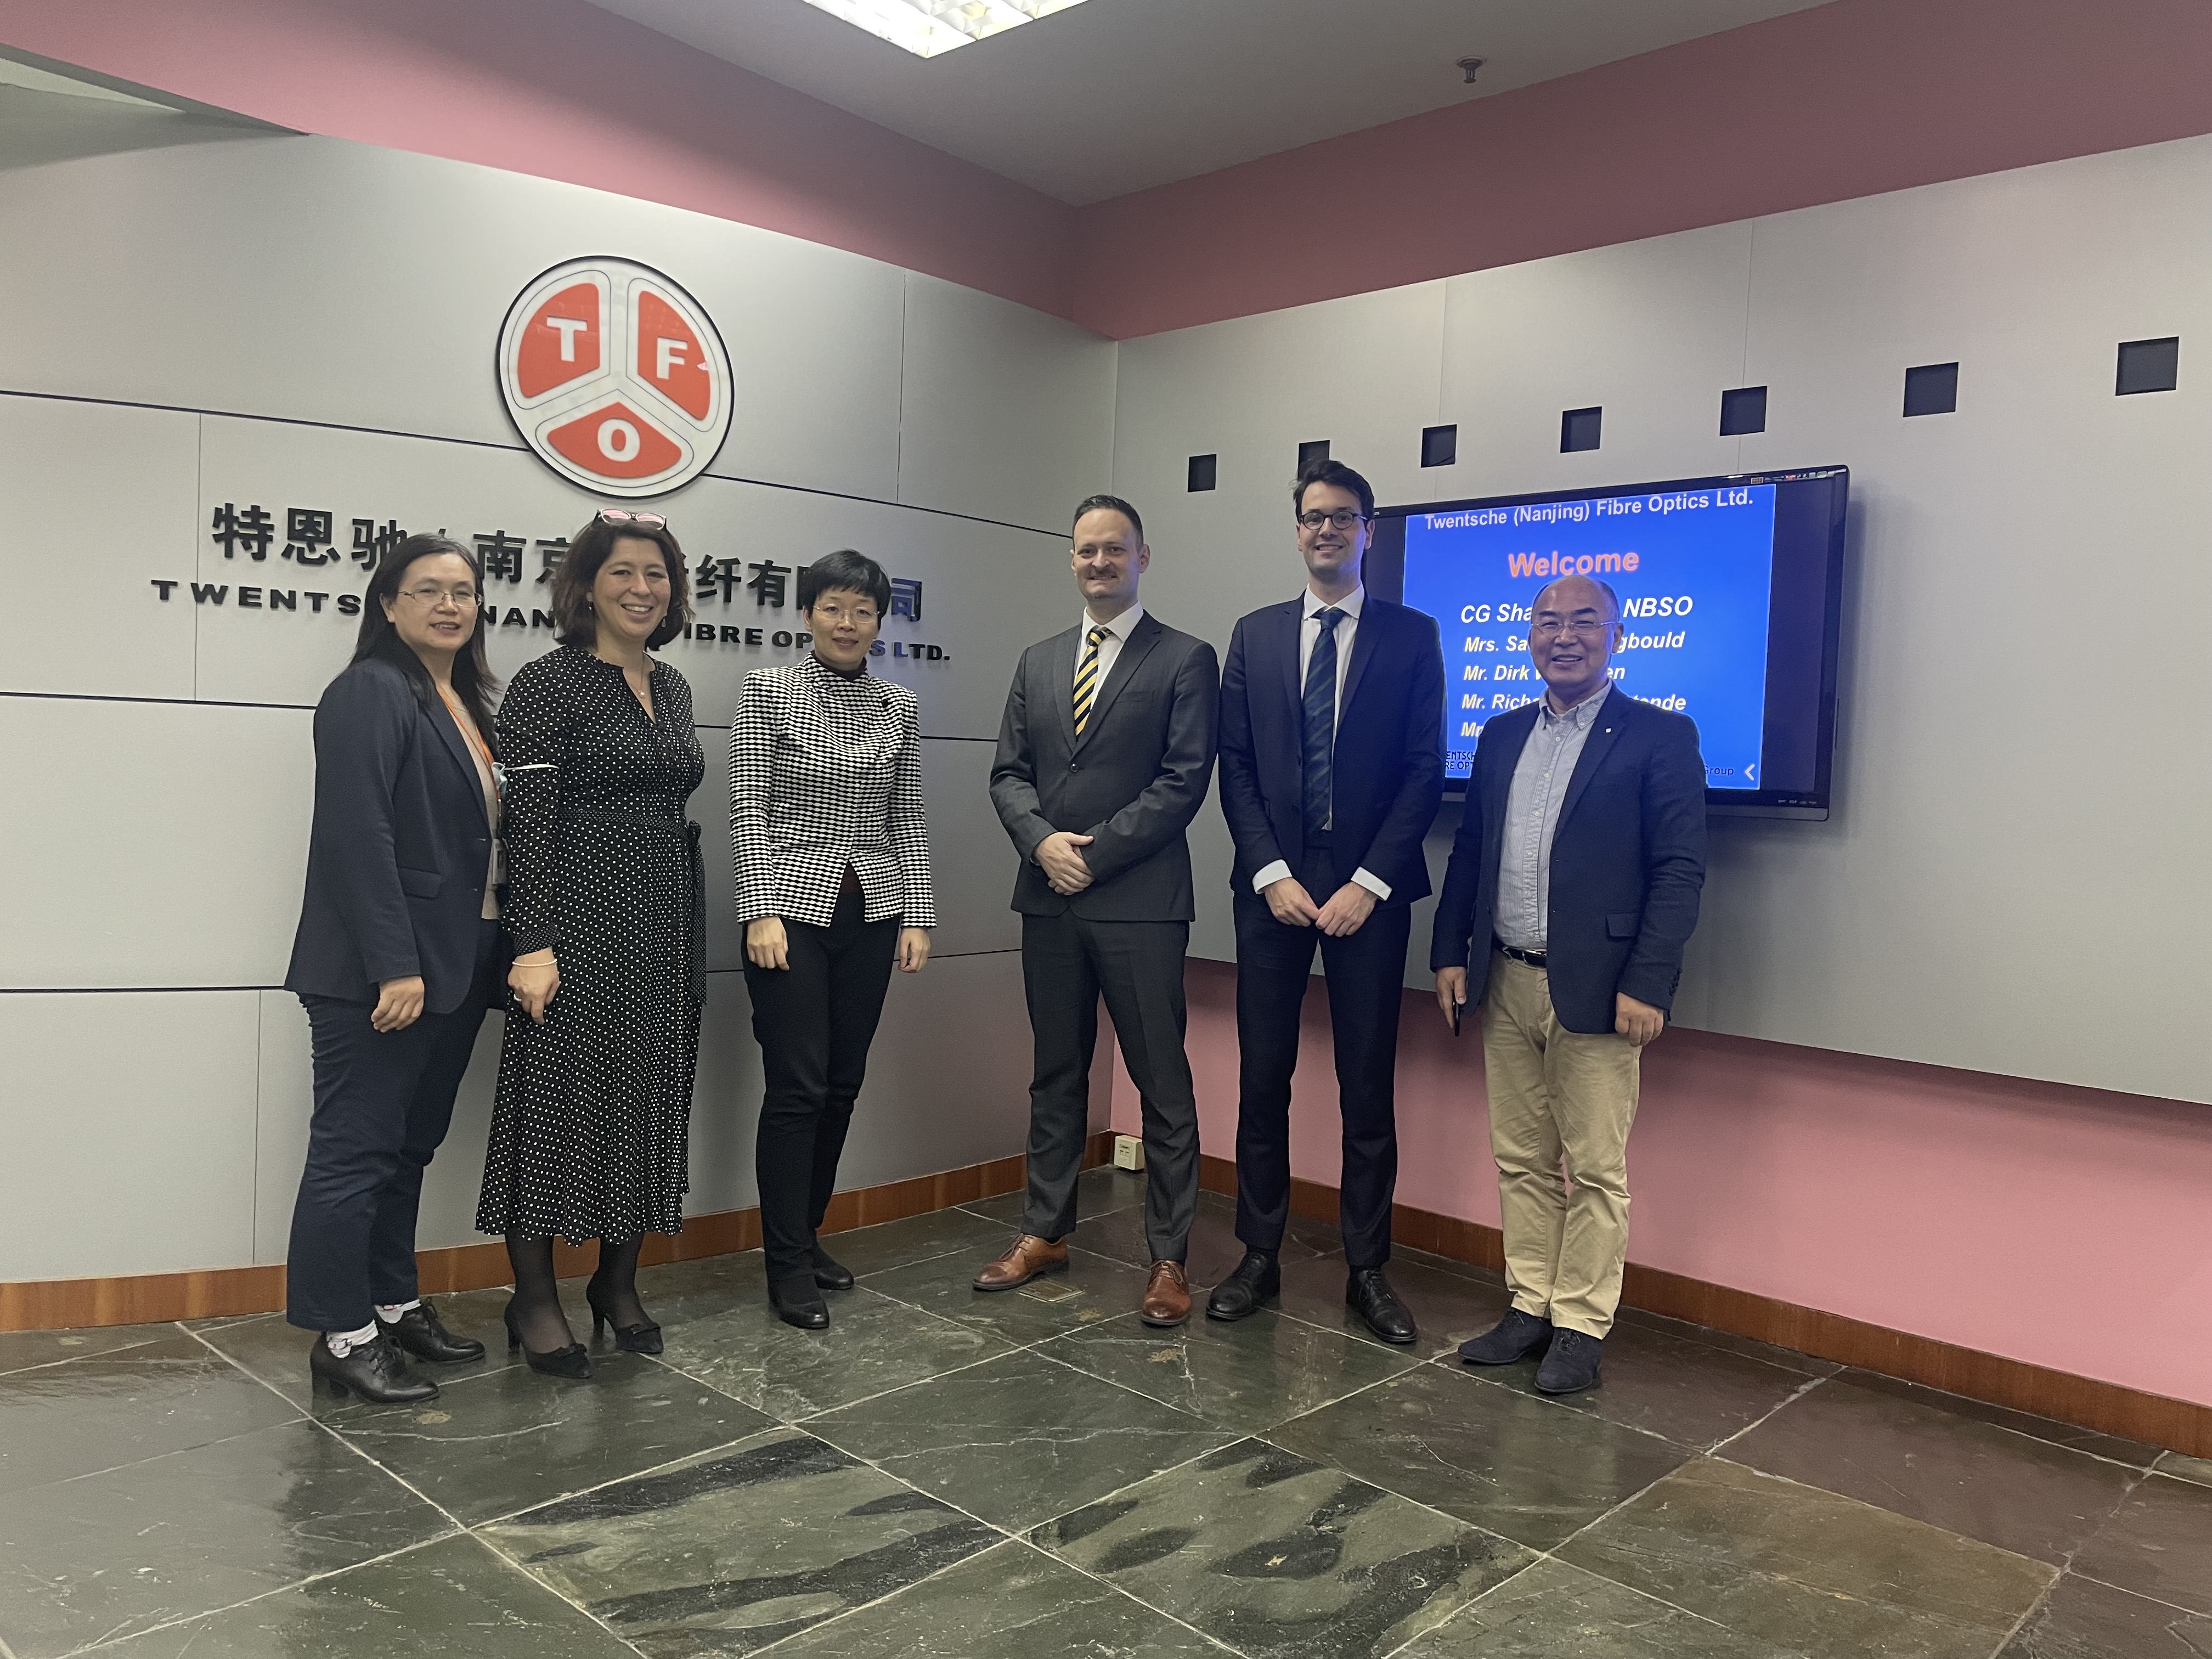 The Deputy Consul General of the Consulate General of the Netherlands in Shanghai visited TFO